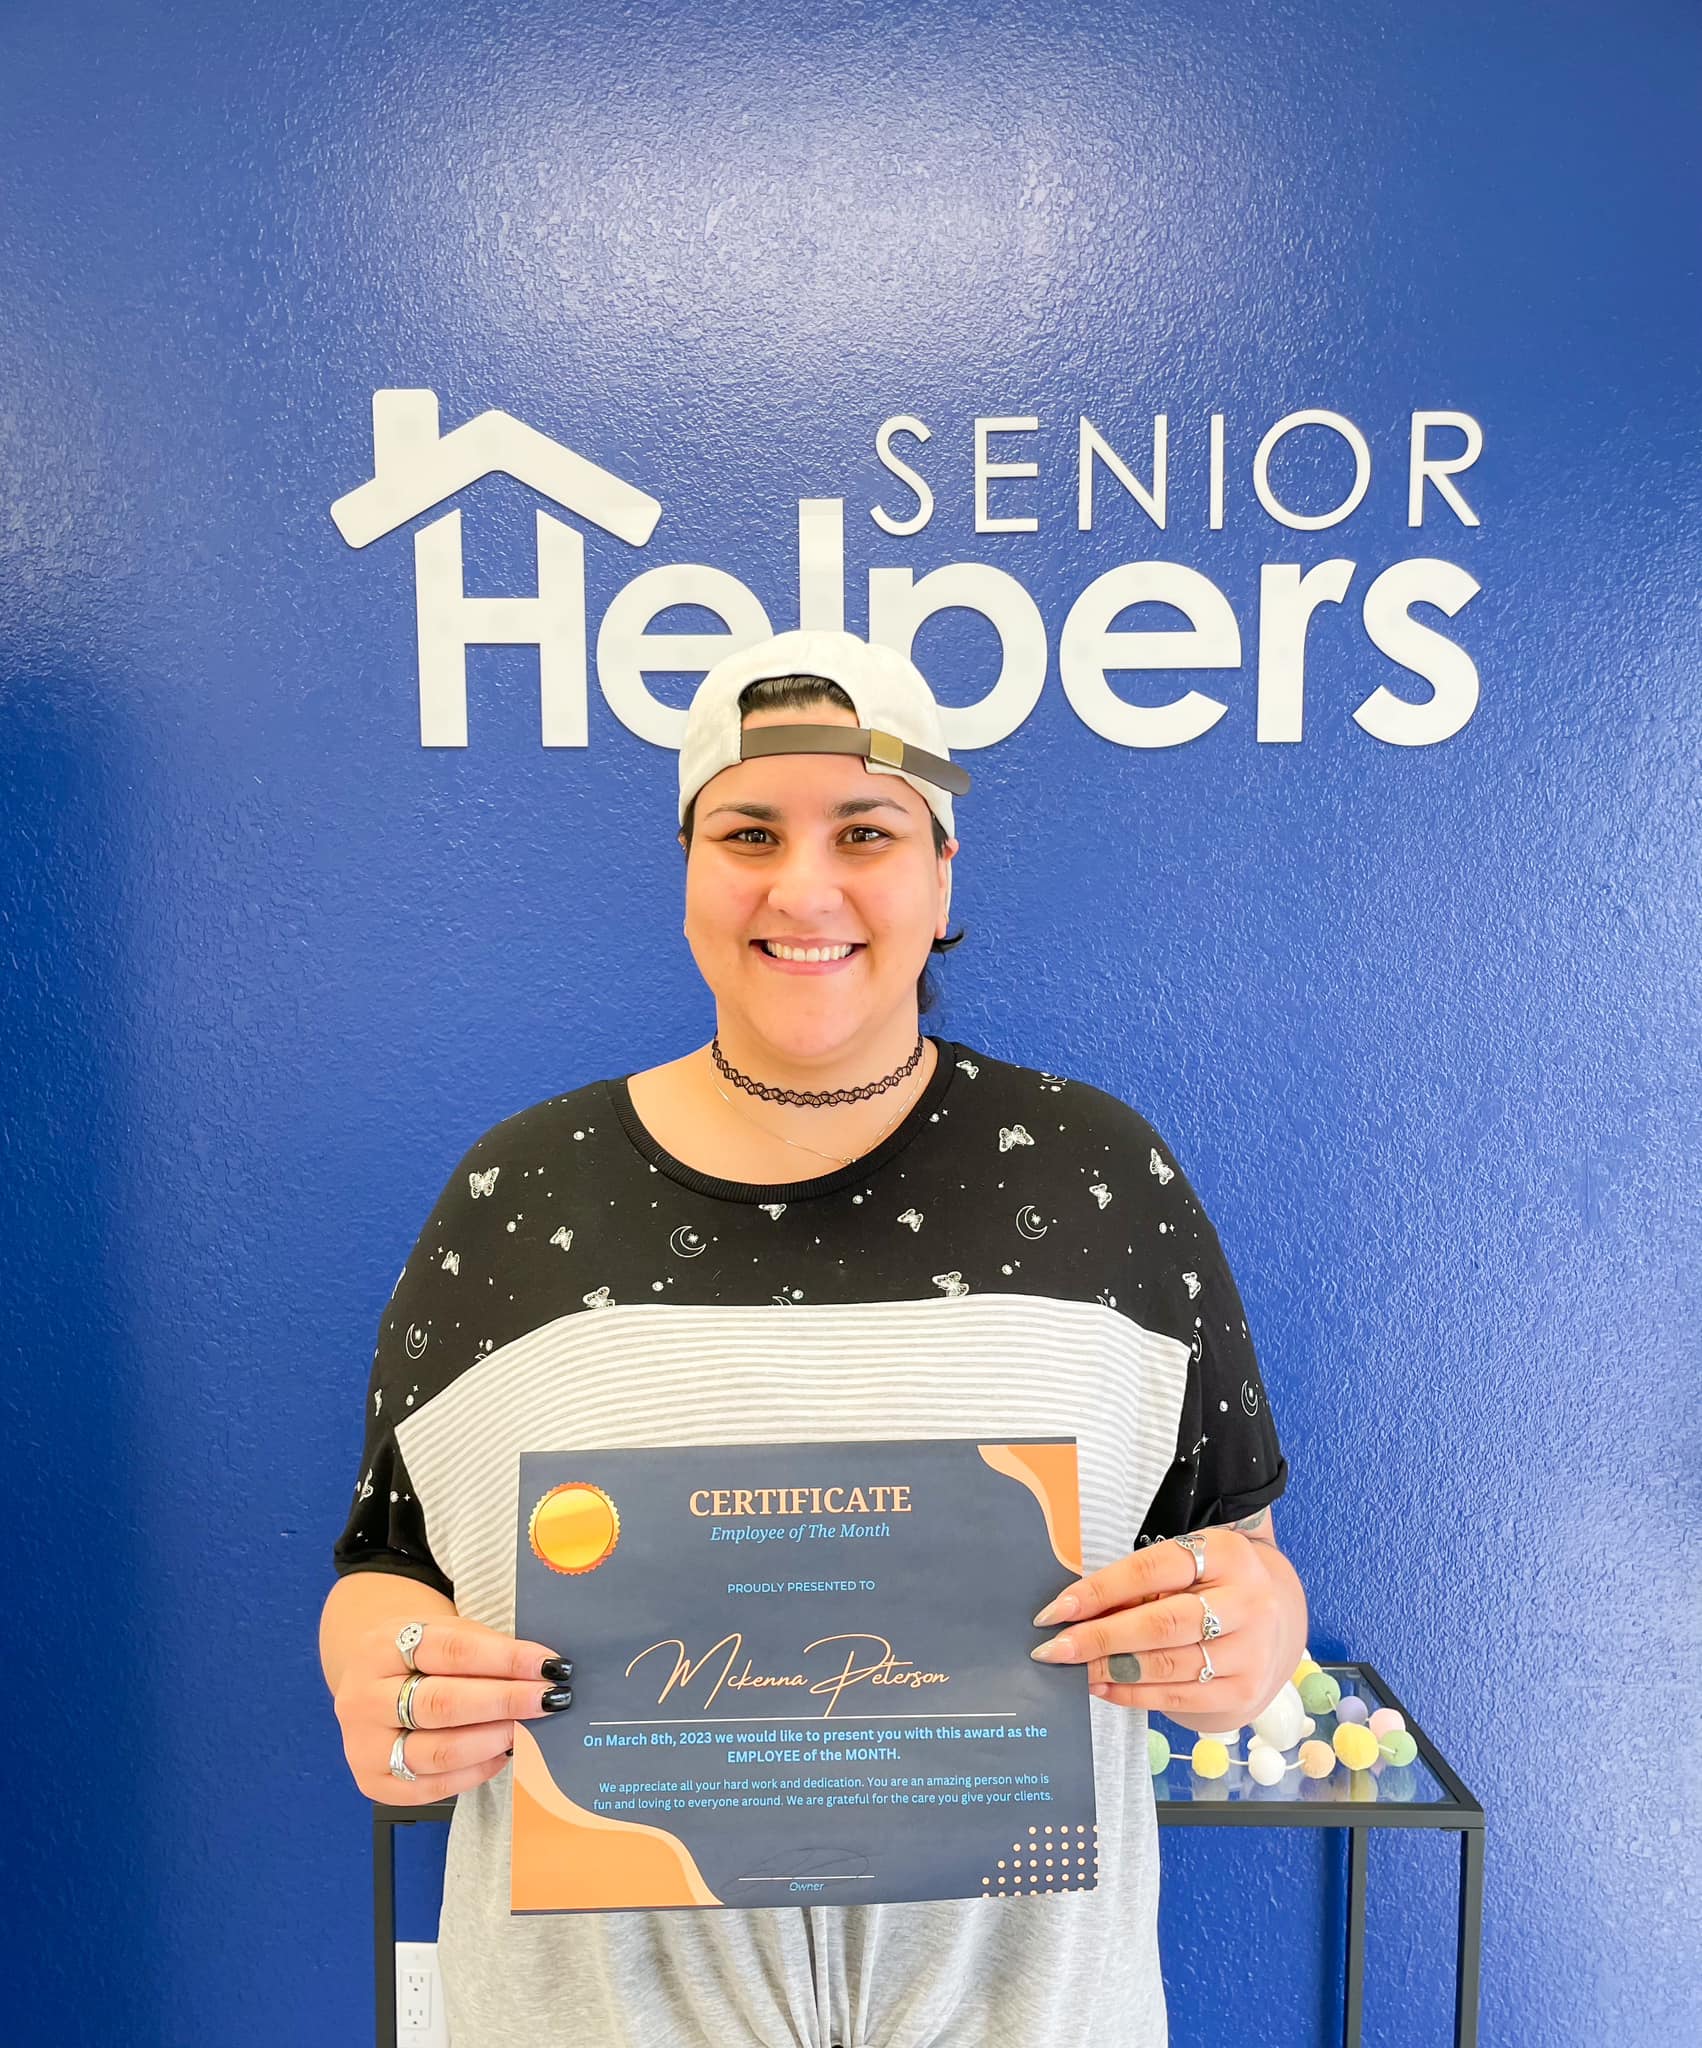 Congratulations to our Caregiver of the month McKenna! Thank you for your dedication and compassion with our families. You truly find a way to bond and make families feel comfort when you visit.